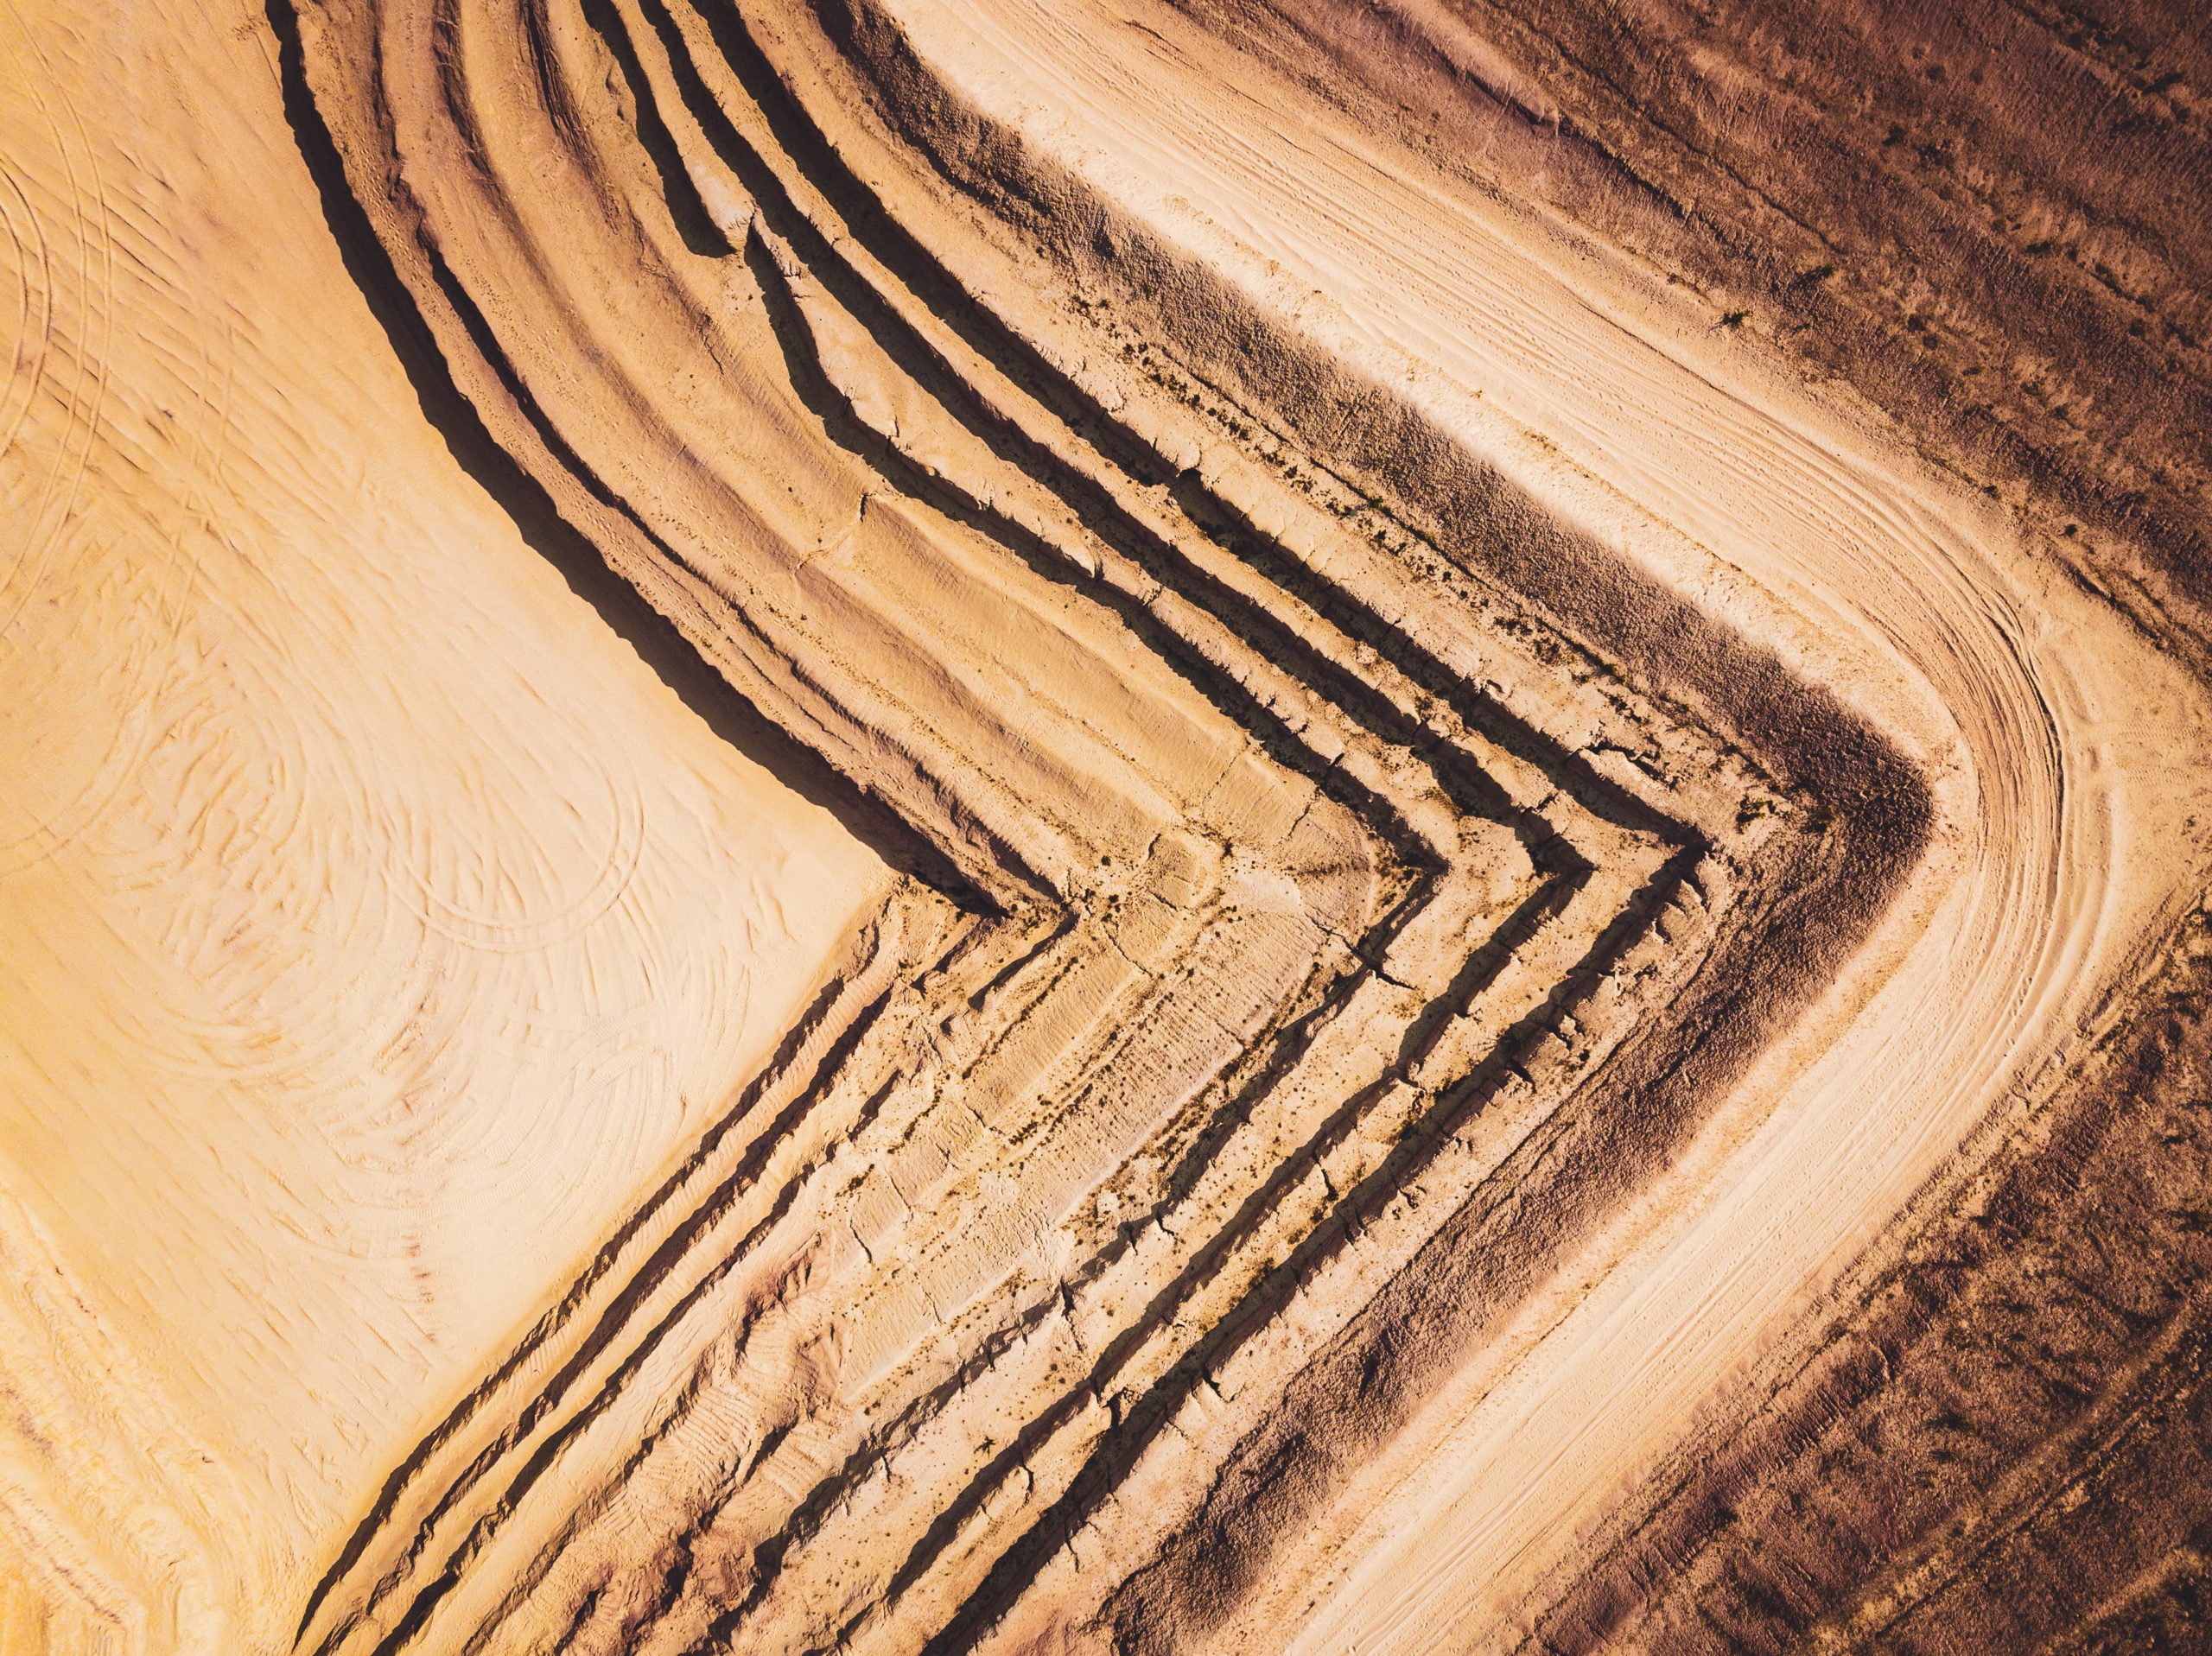 Top down aerial photo of a sand quarry with different layers descending down forming triangular shapes at 90° angles